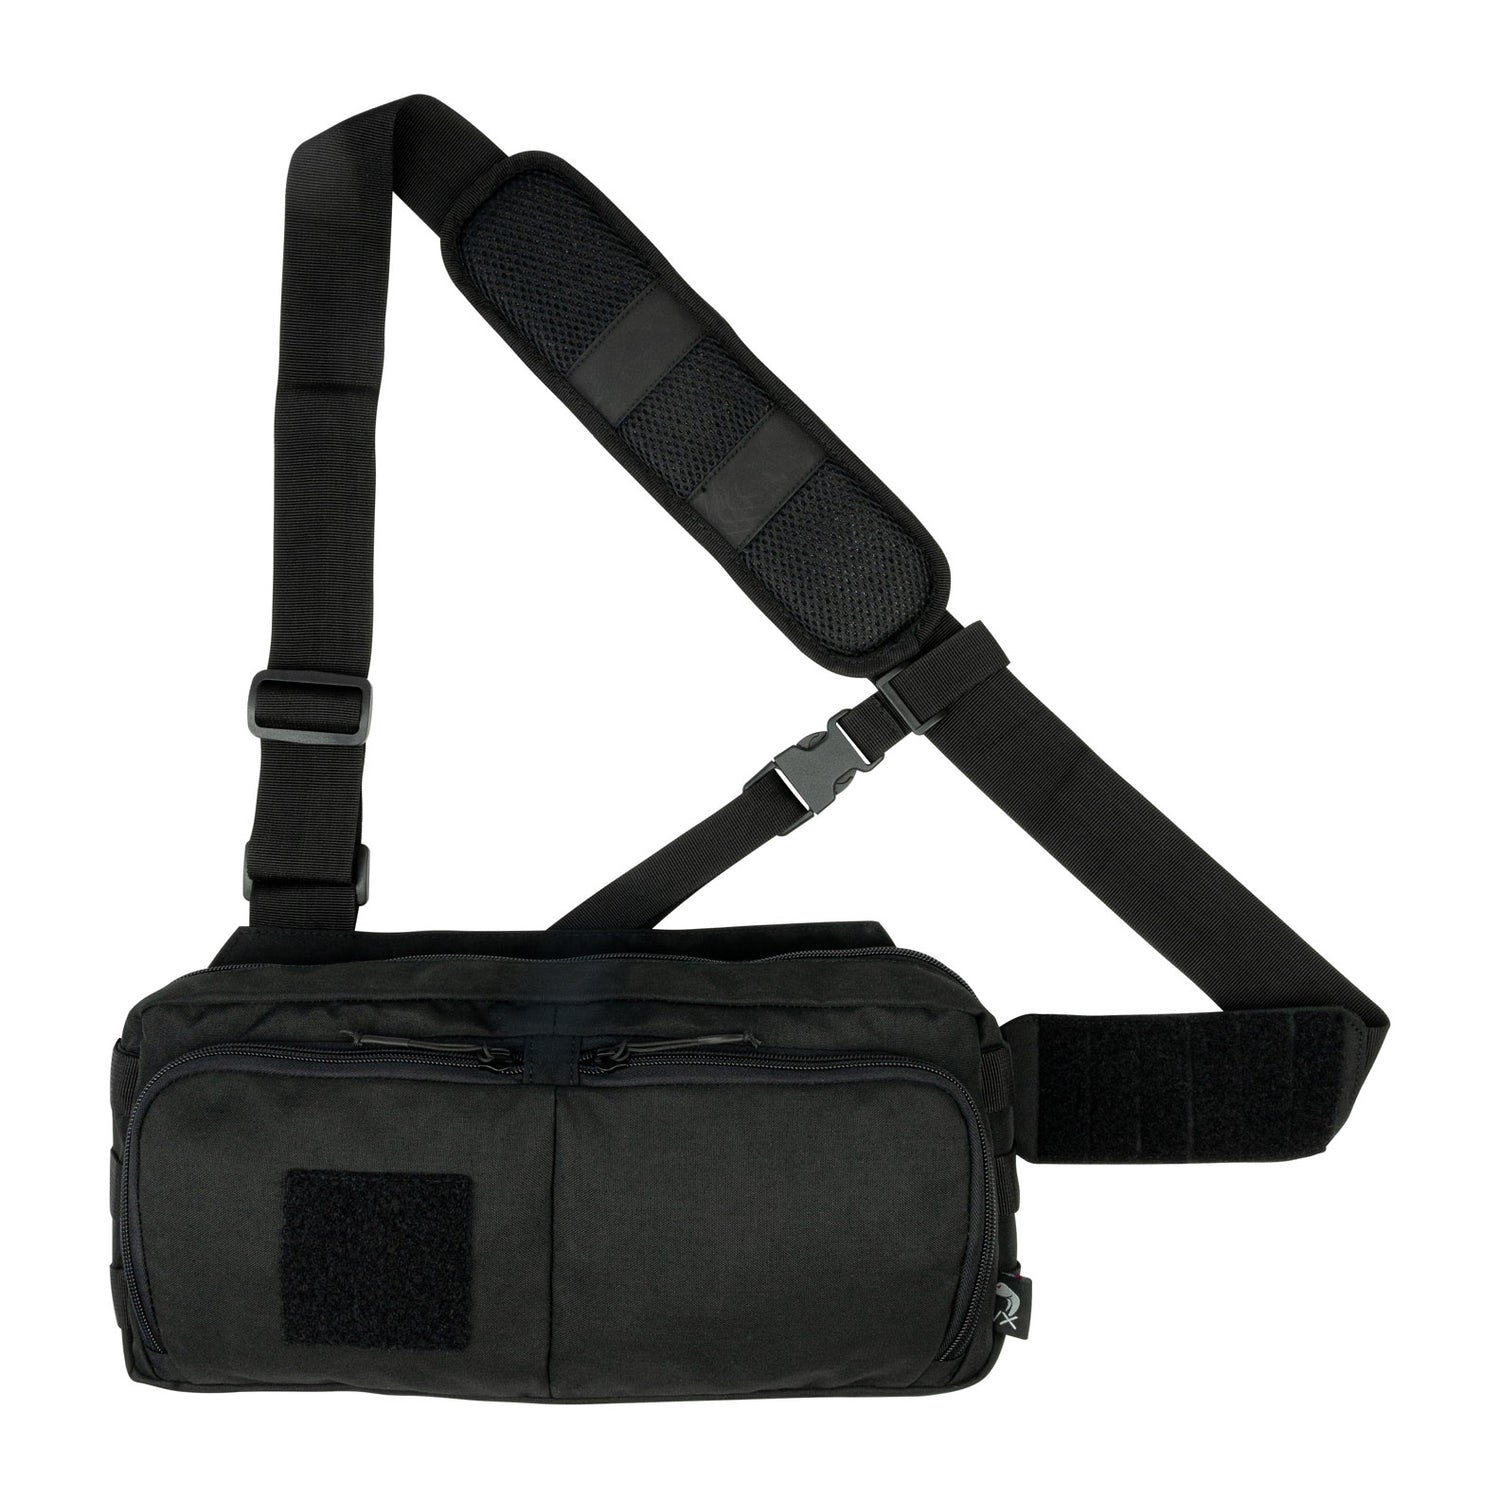 Viper-VX-Buckle-Up-Sling-Pack